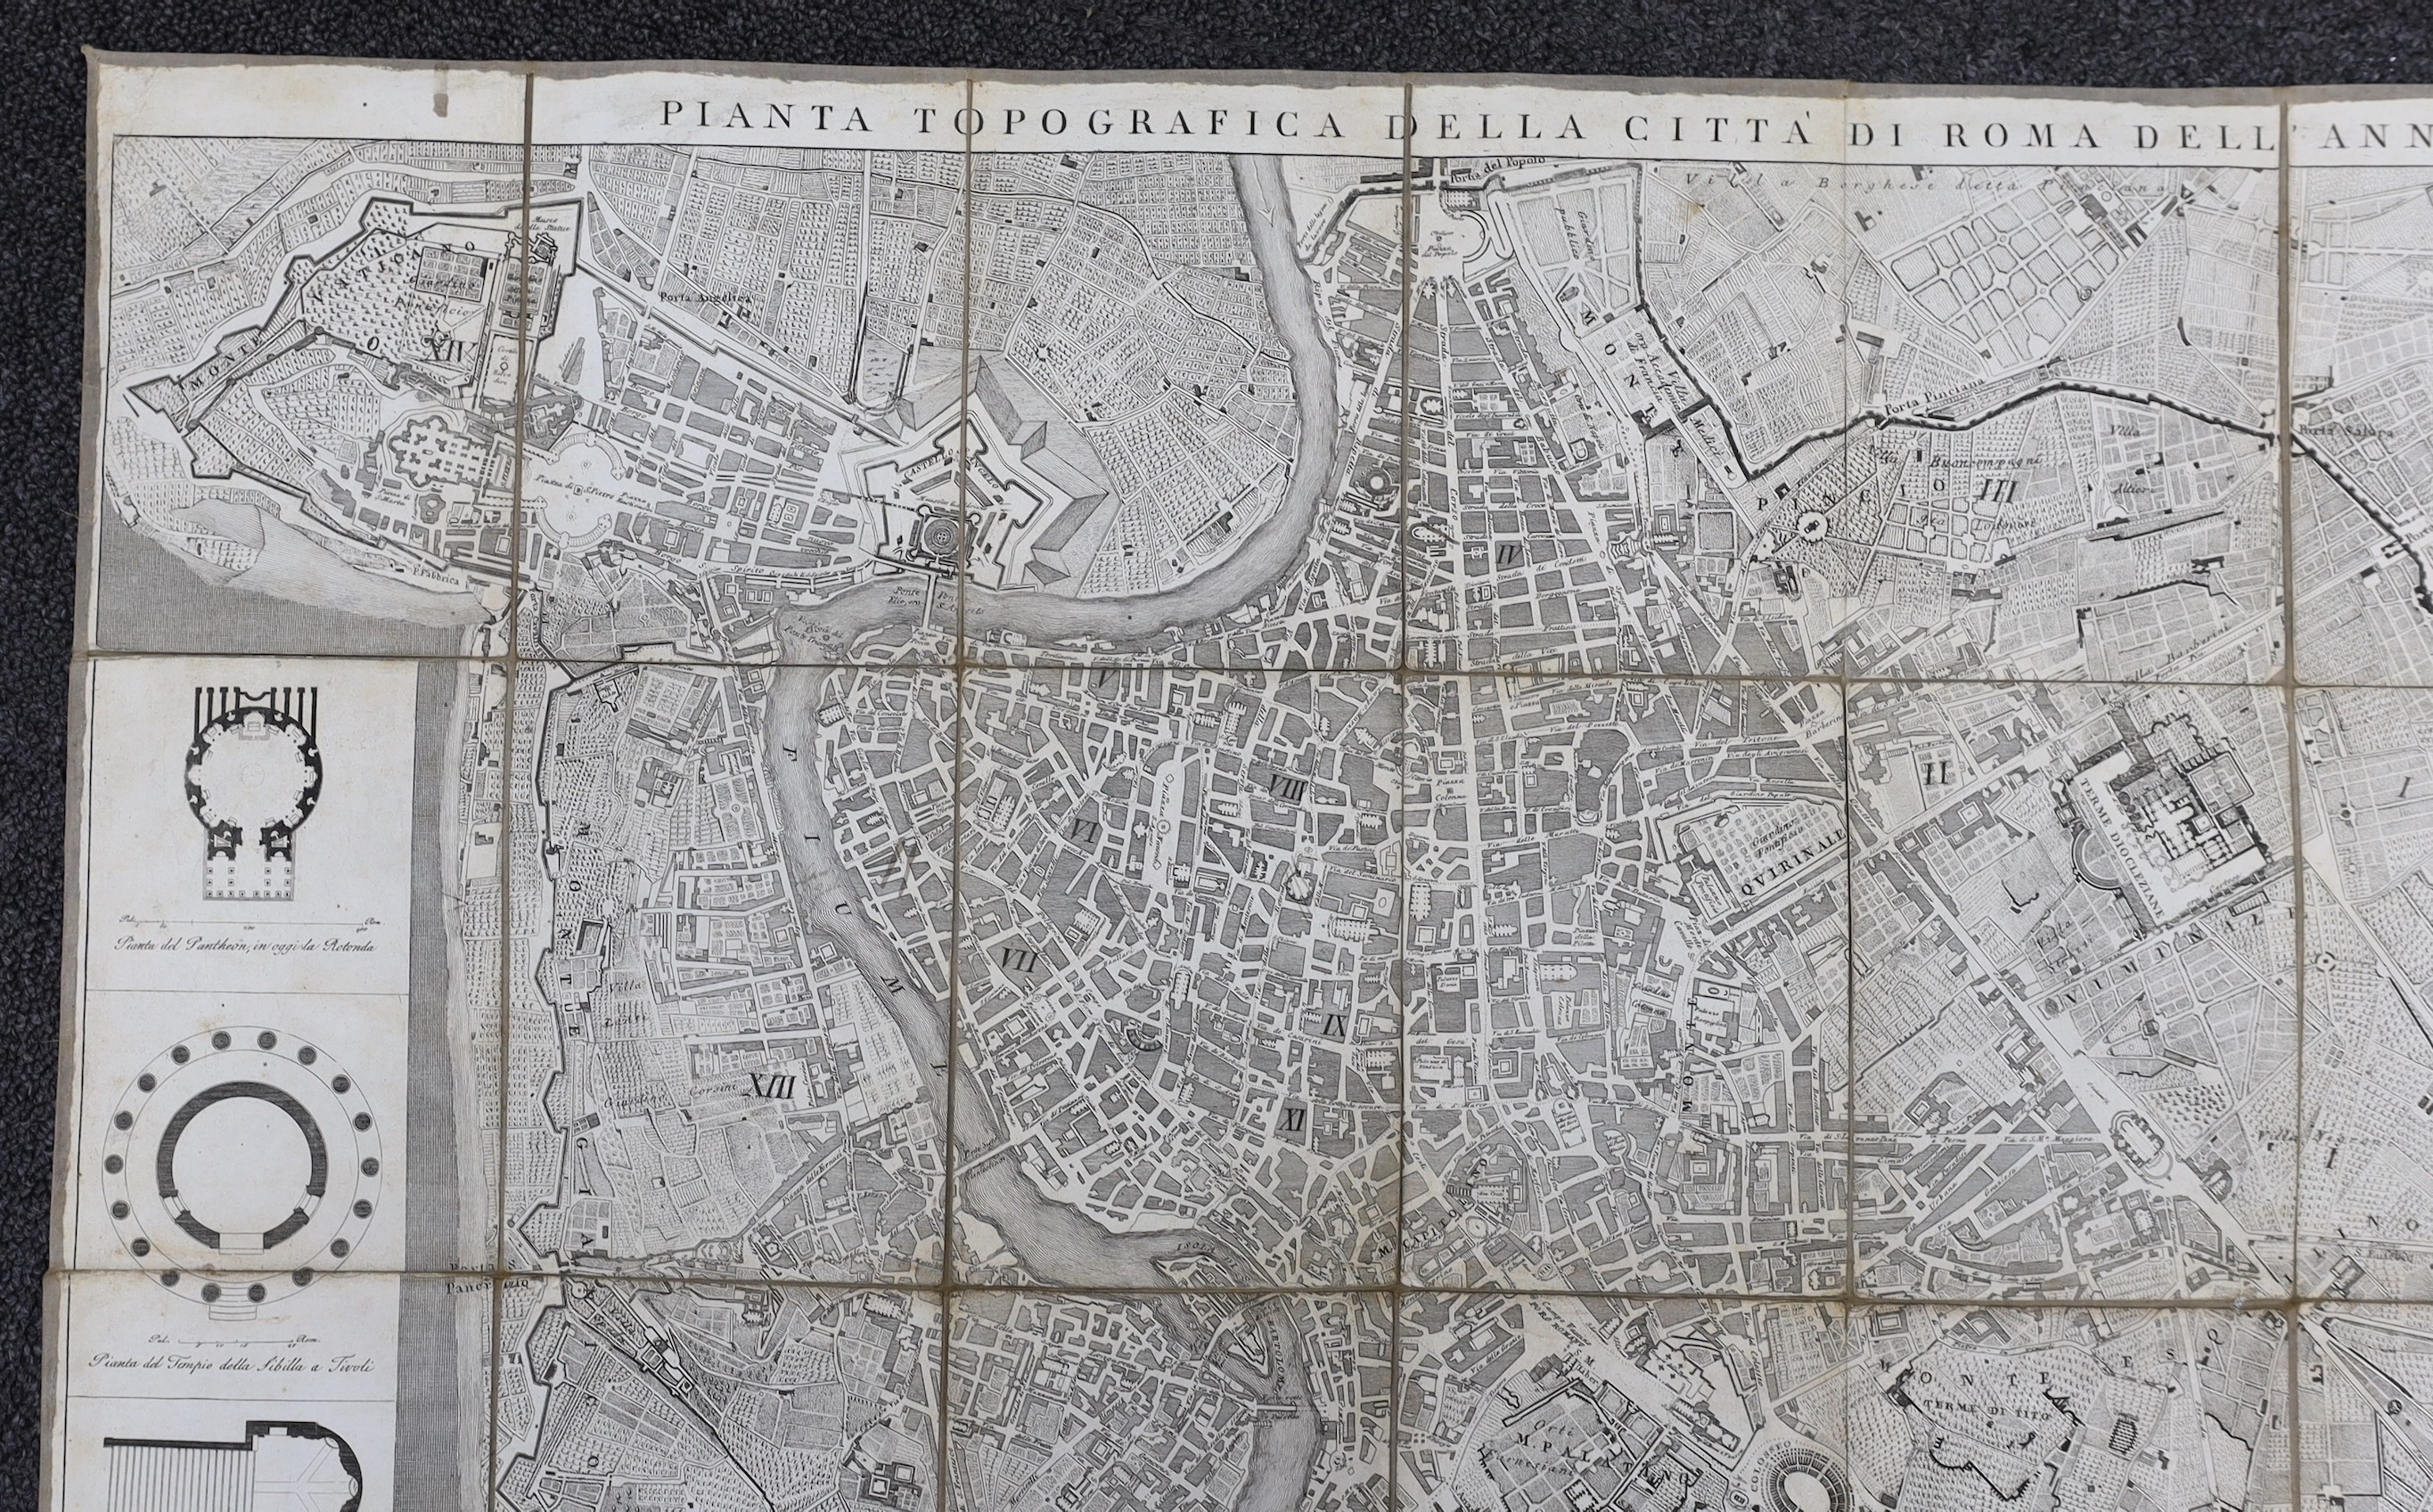 (Rome) Pianta Topgrafica dela Citta di Roma ... folded large scale plan, dissected and mounted on linen, engraved plans in surrounds, opens to approx. 44 x 82cms; some individual buildings and streets named, contained in